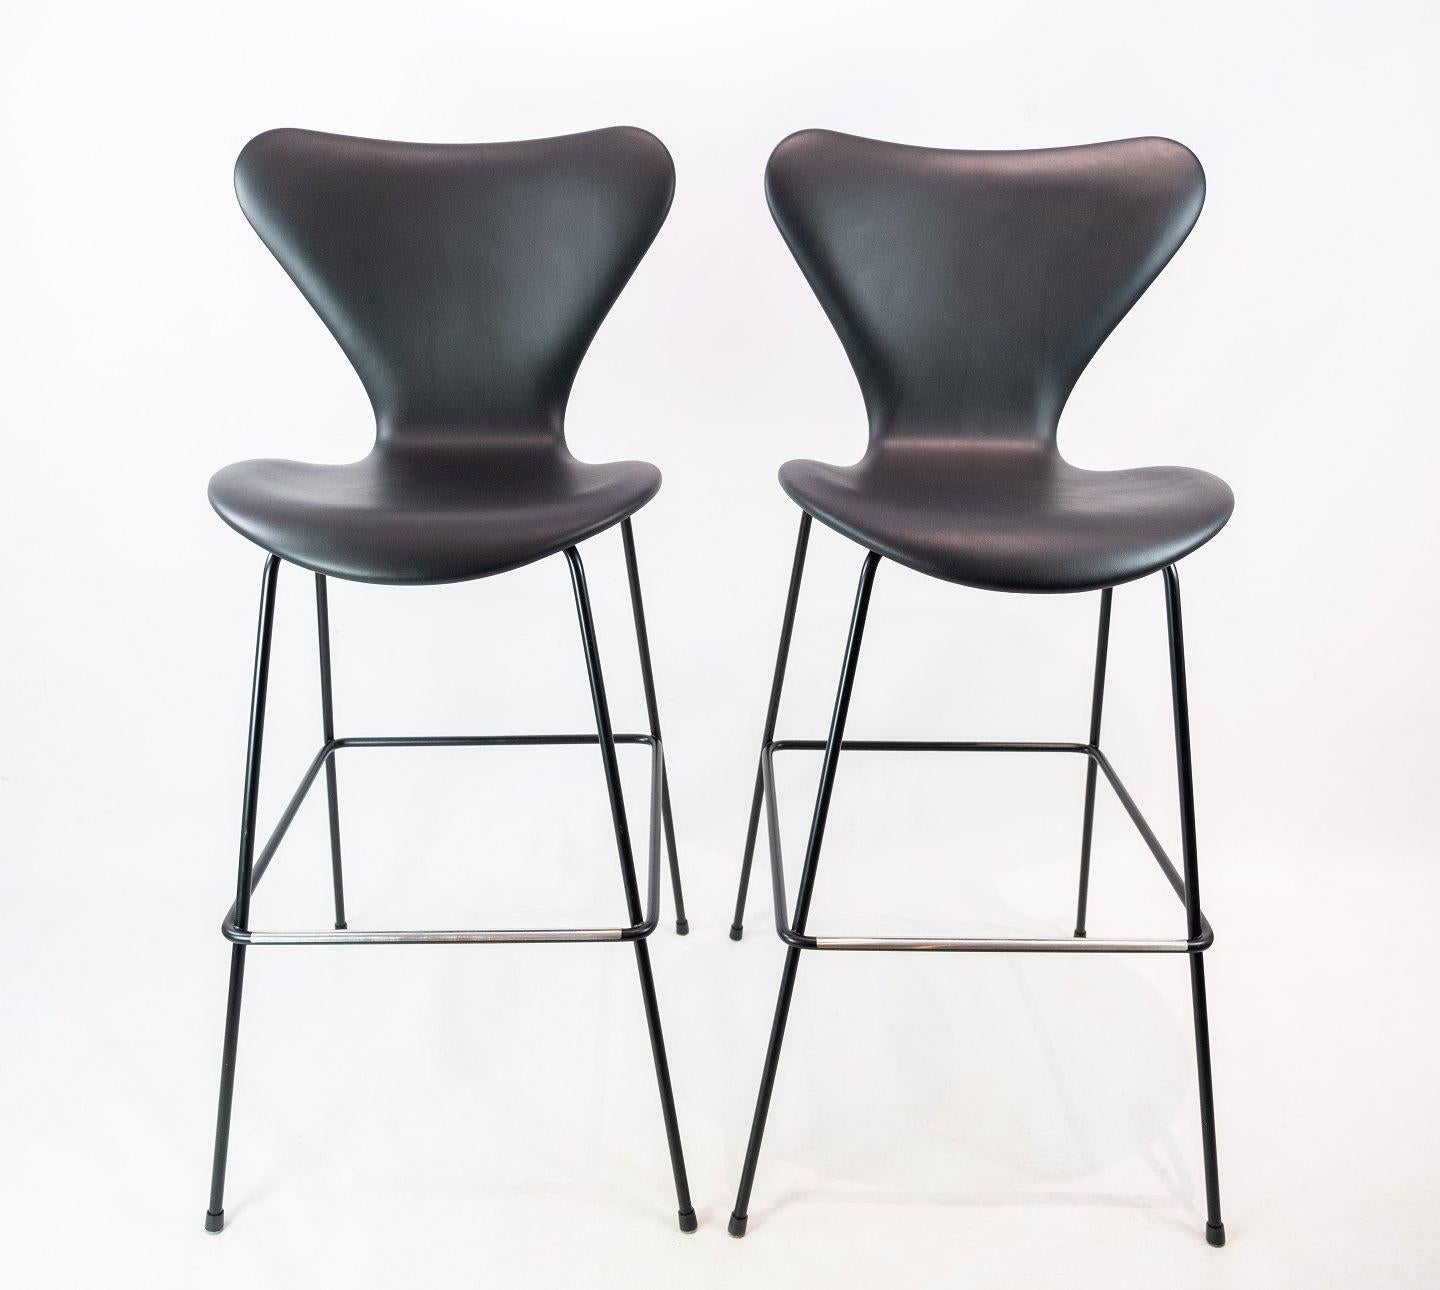 A pair of seven bar stools, model 3187/3197, by Arne Jacobsen and Fritz Hansen. The stools are with original upholstery of black leather.
   